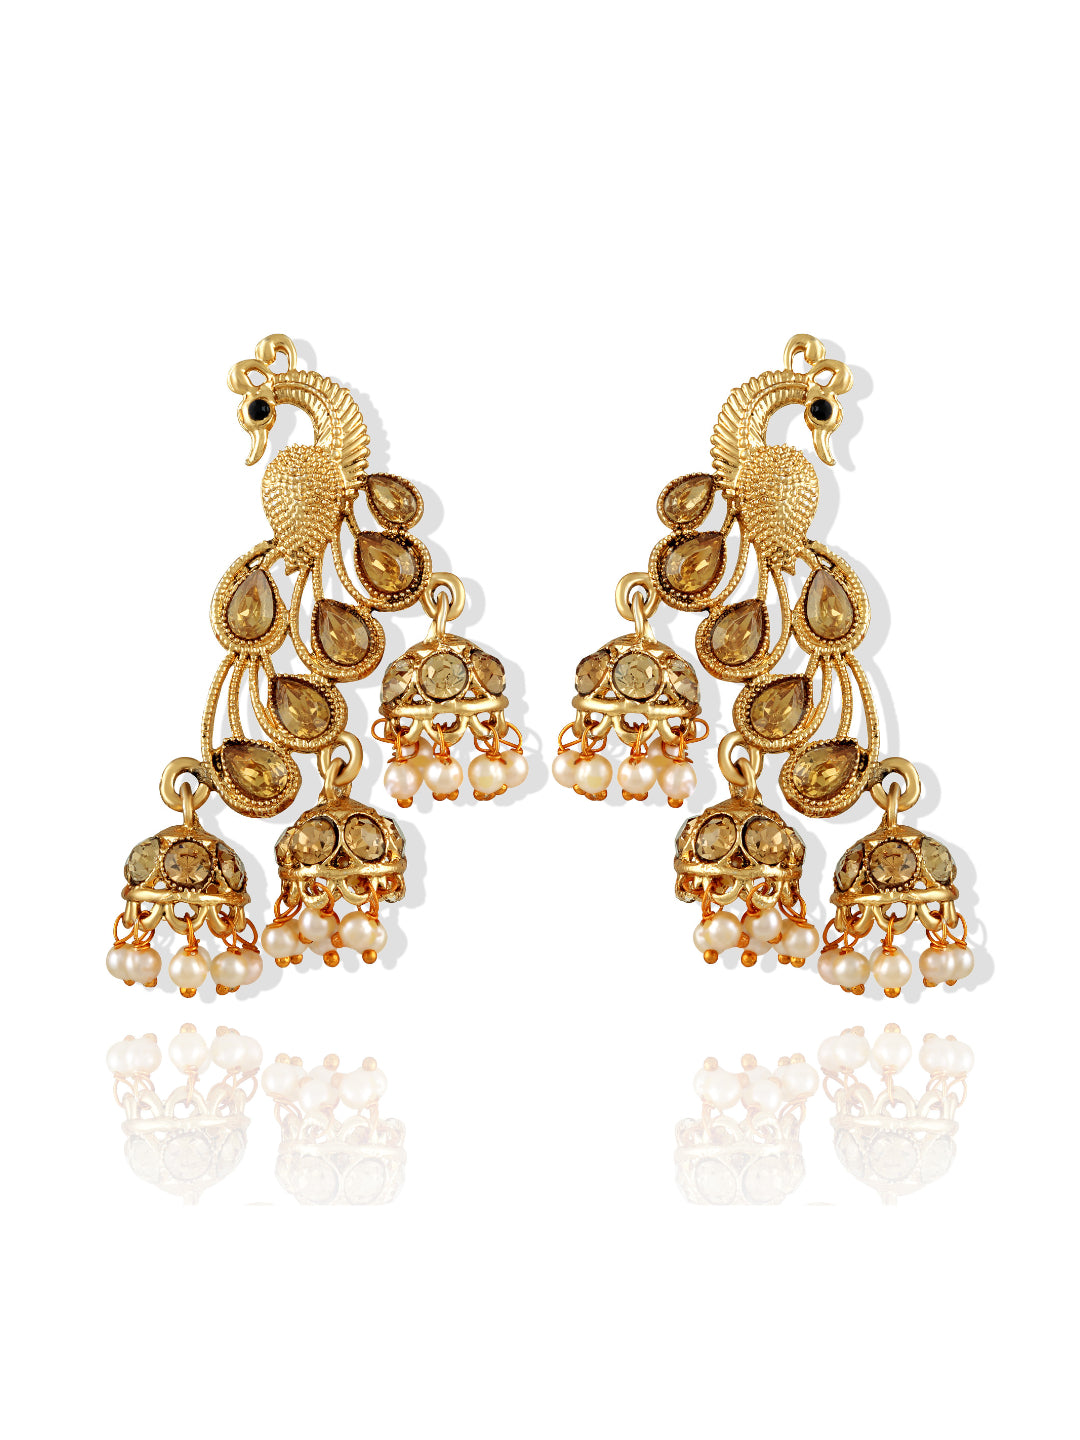 Off-White Antique Gold-Plated Peacock Shaped Jhumkas